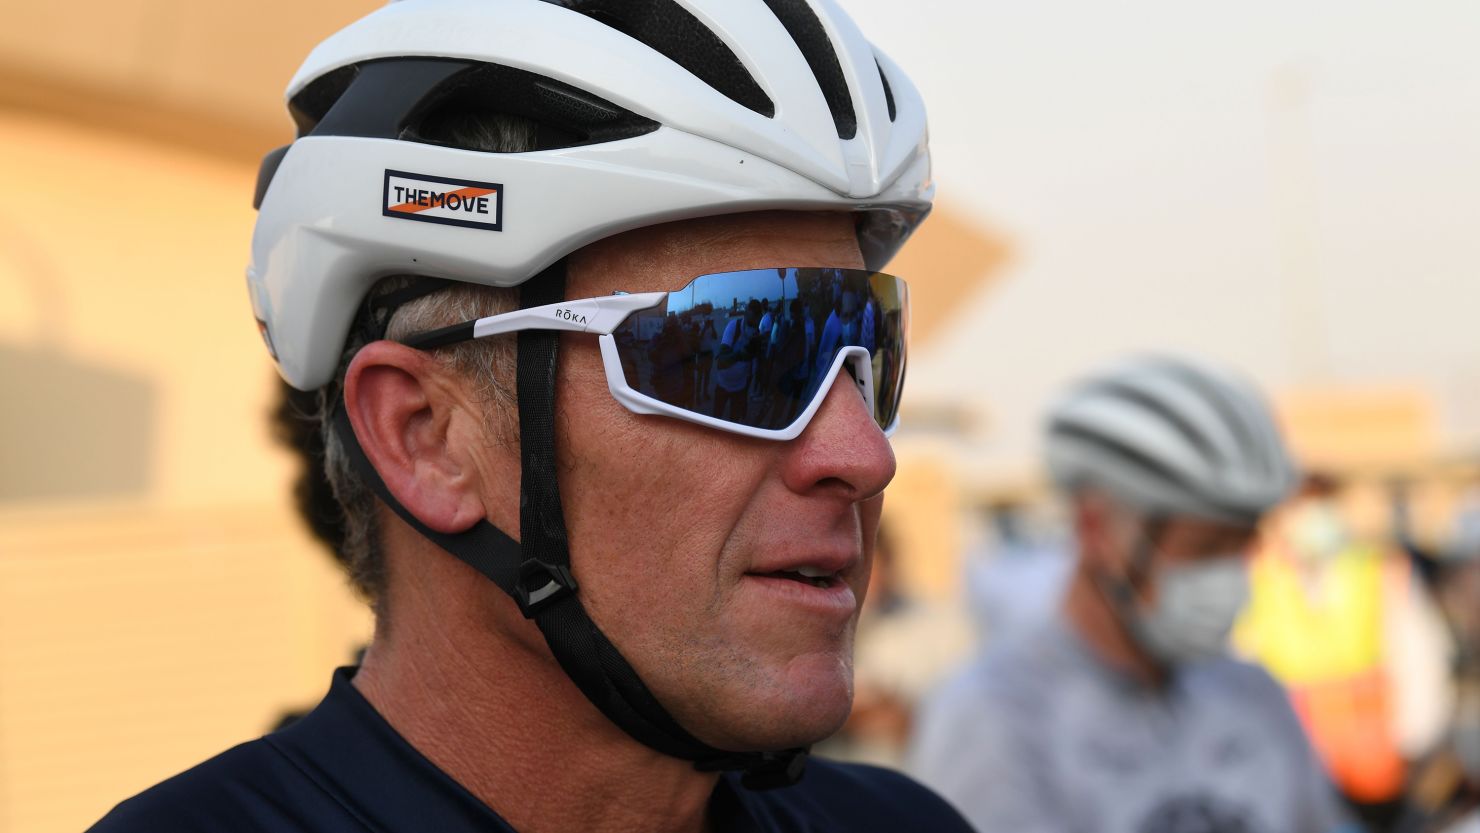 Lance Armstrong was stripped of his record seven Tour de France titles.